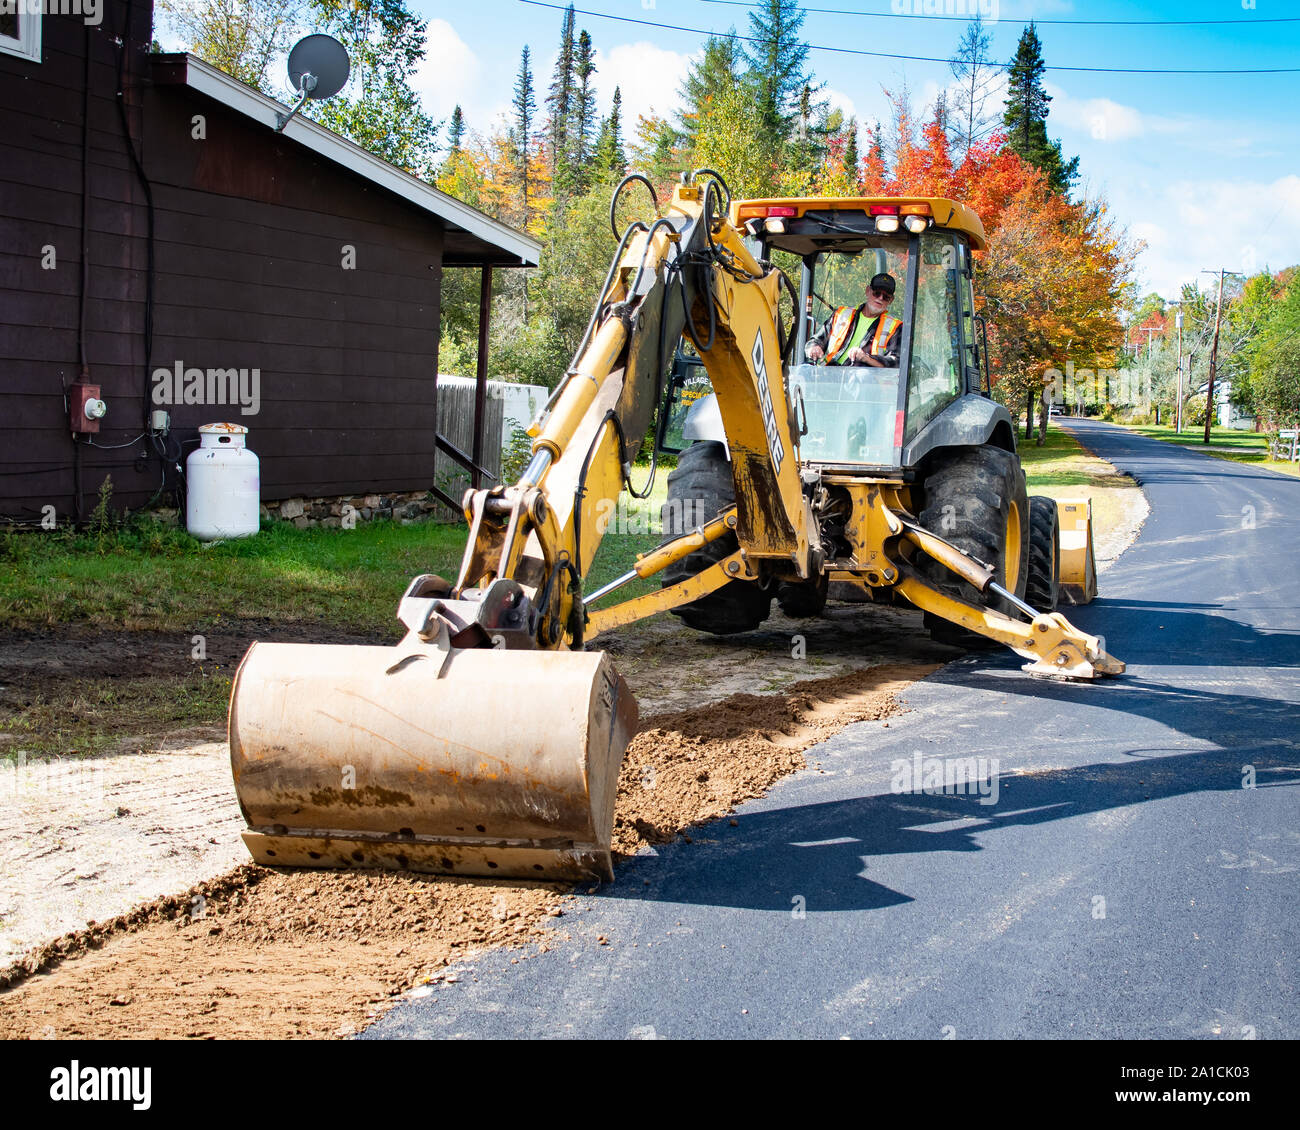 A wheeled backhoe excavator working on smoothing the shoulder and edges of a village street in Speculator, NY USA Stock Photo